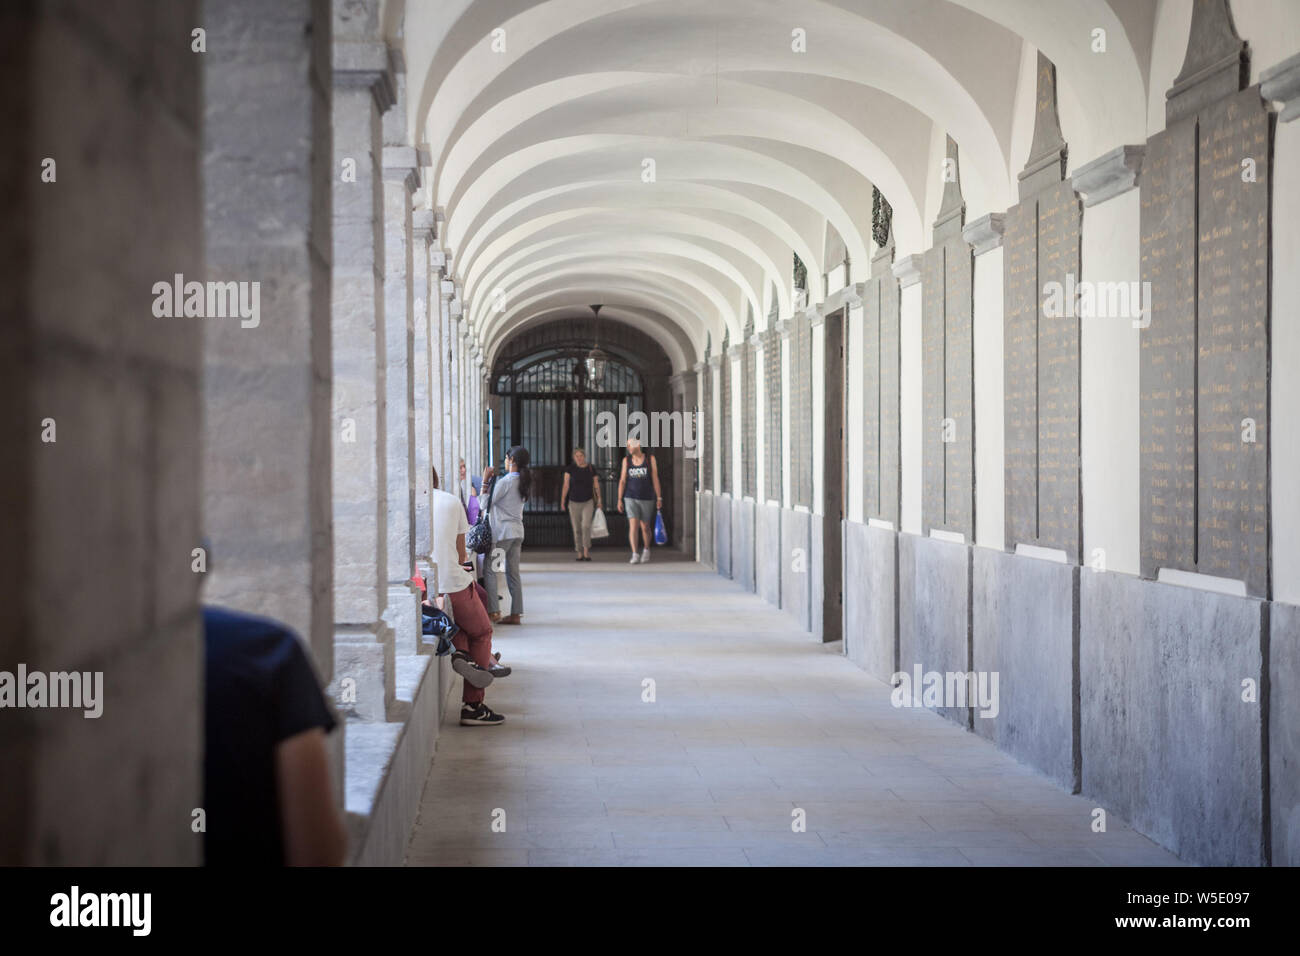 LYON, FRANCE - JULY 19, 2019: Interior cloister (cloitre) of the Hotel Dieu in Lyon, newly renovated. It is one of the landmarks of the city, a former Stock Photo